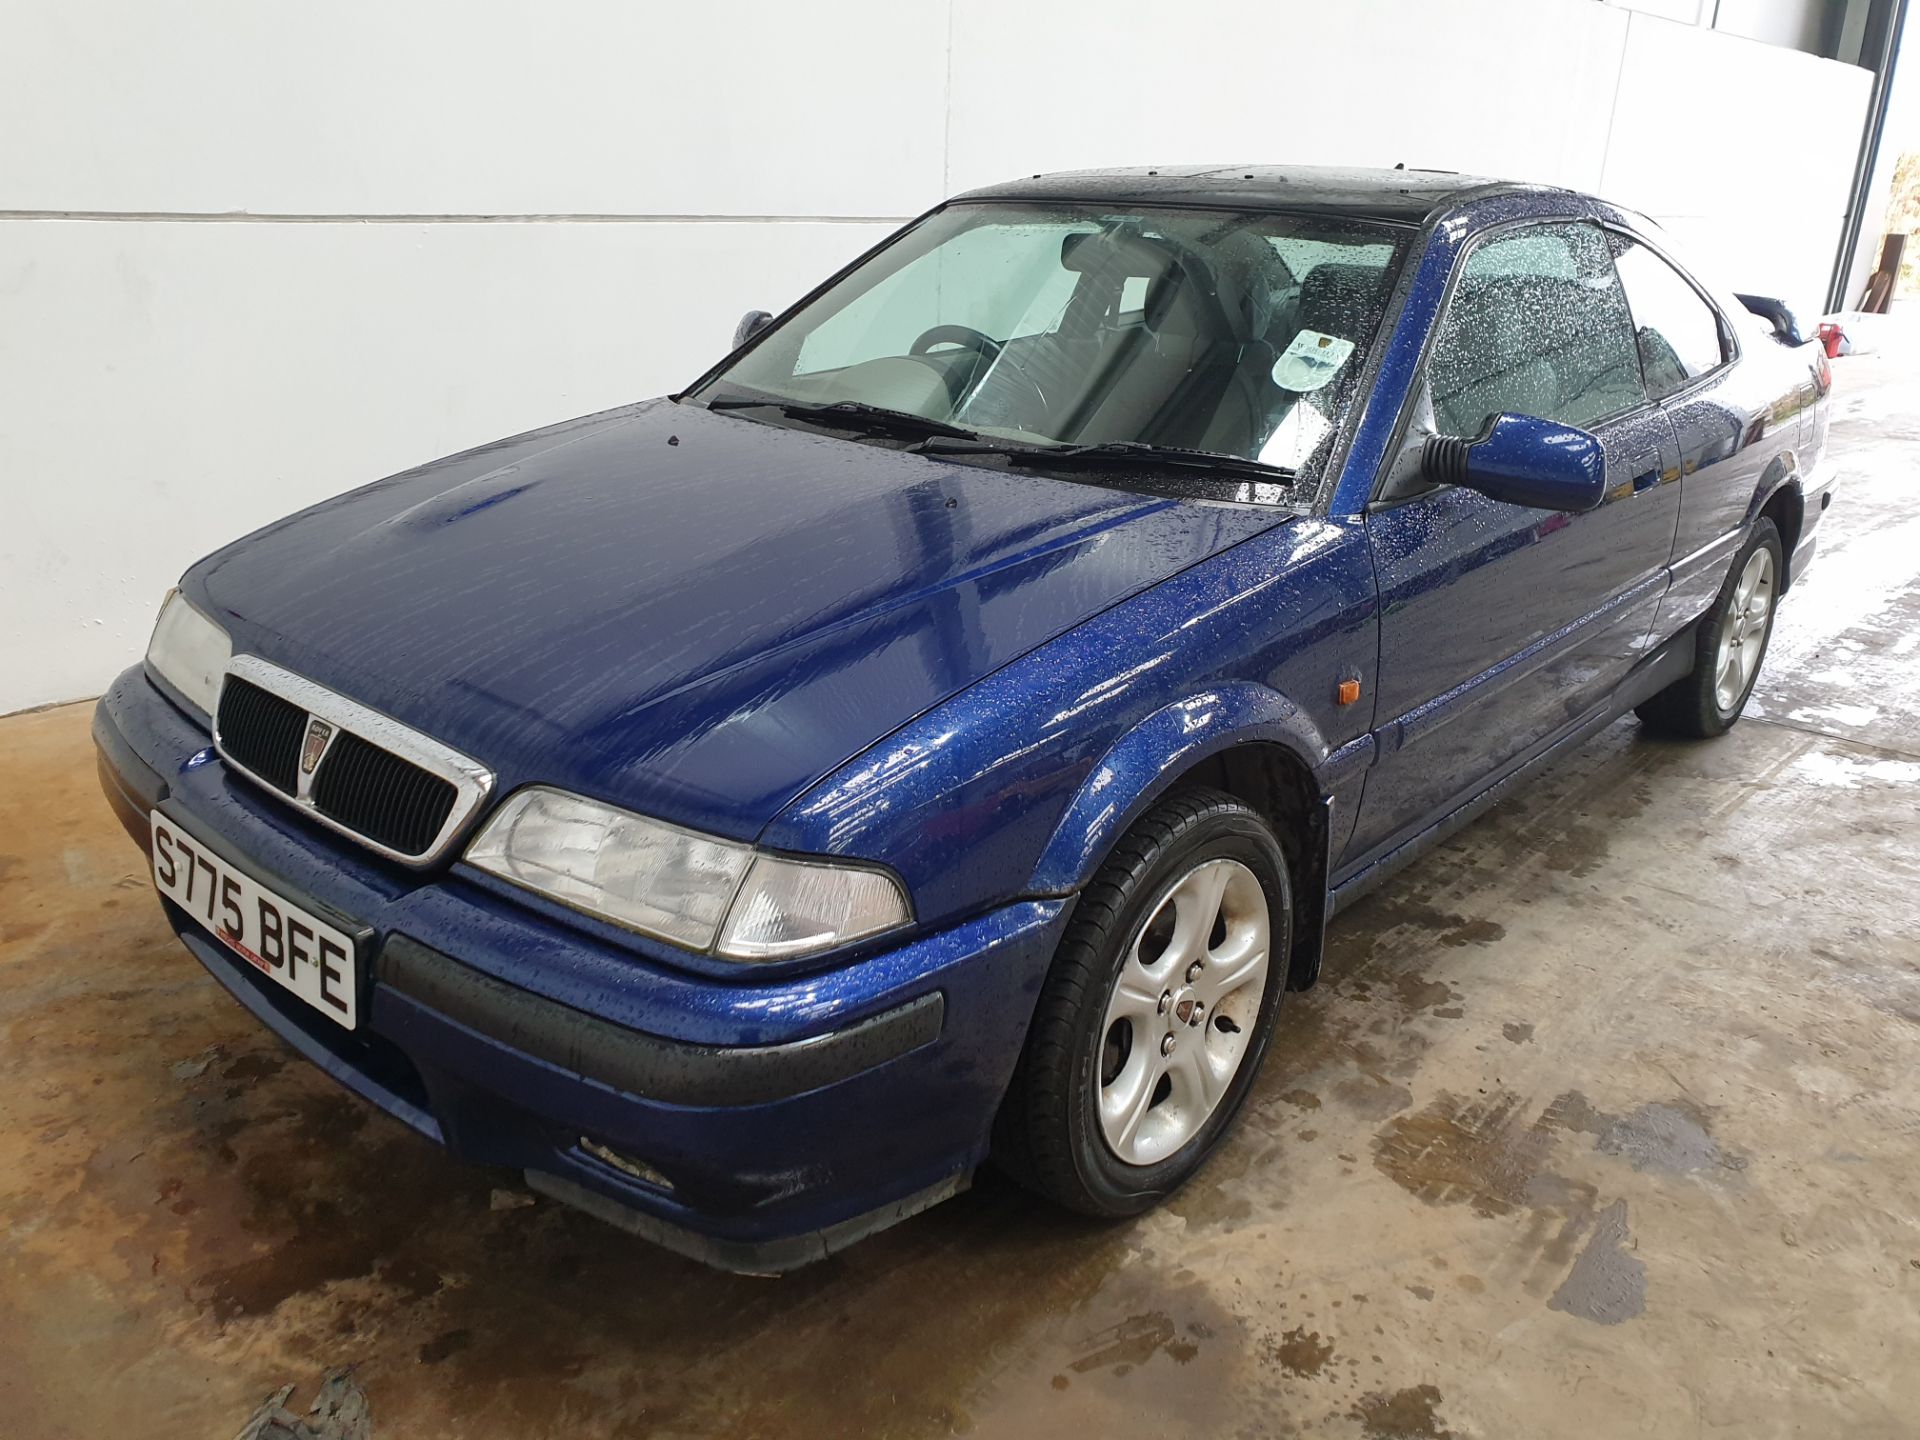 1998 Rover 216 Coupe SE - Image 7 of 11